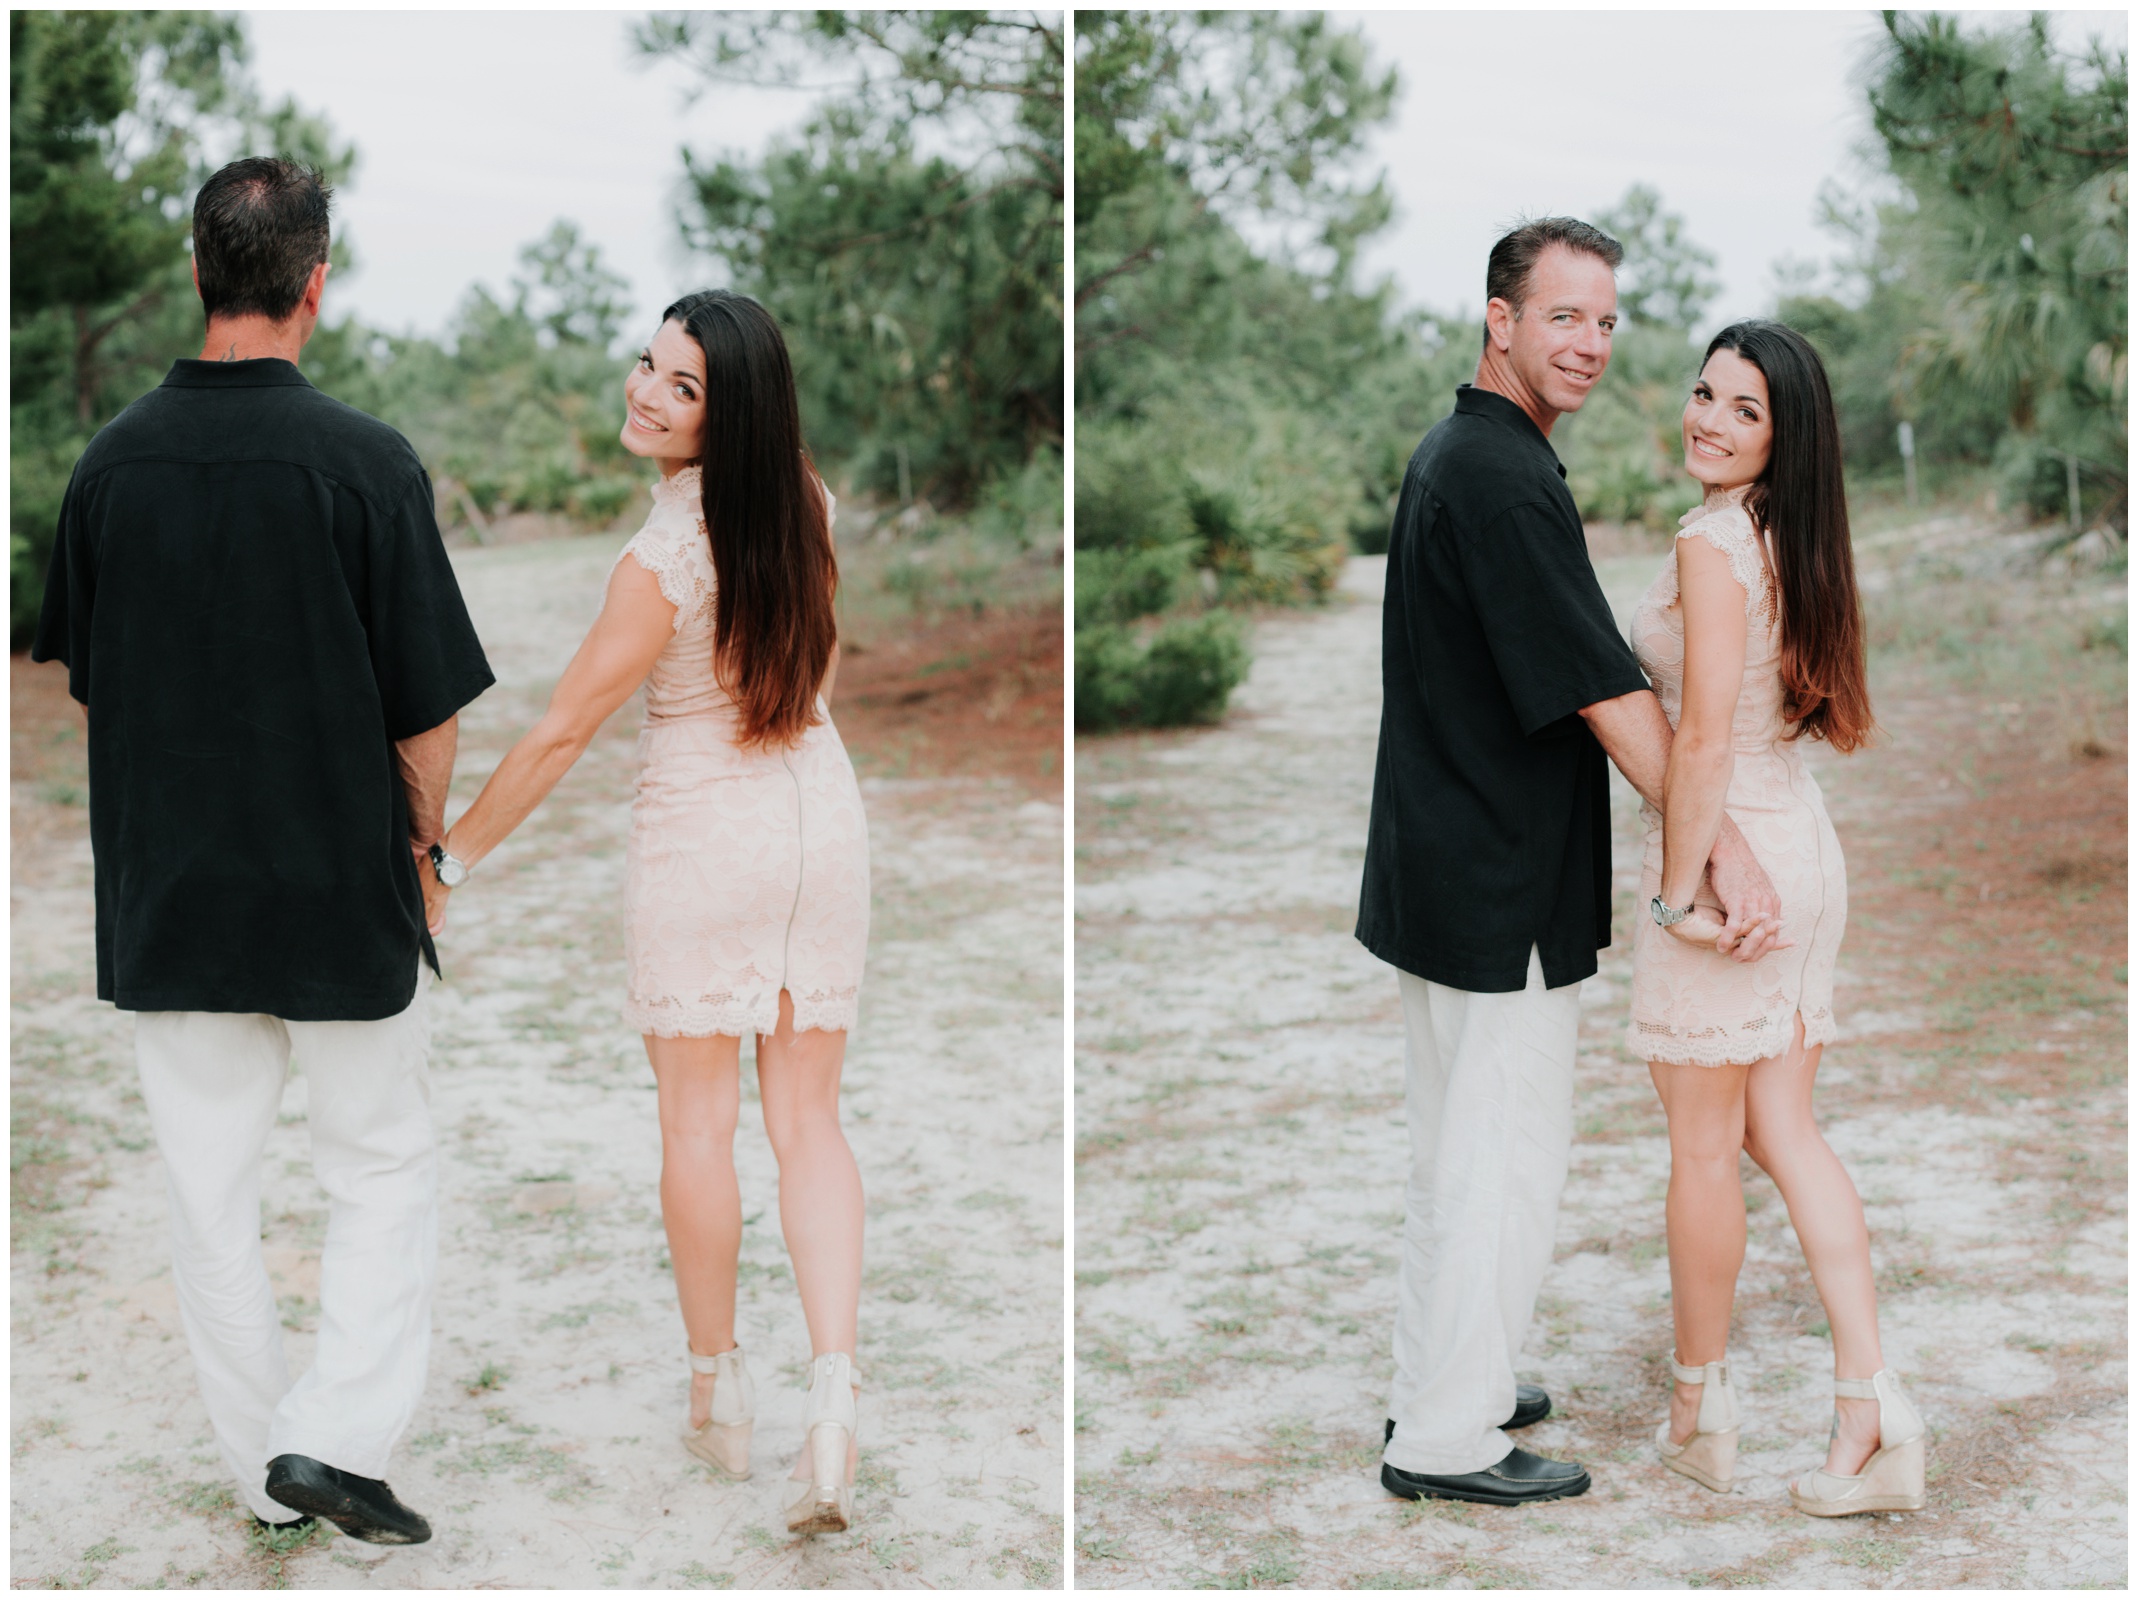 Walking side by side in this natural setting makes for beautiful south florida engagement photos.&nbsp;